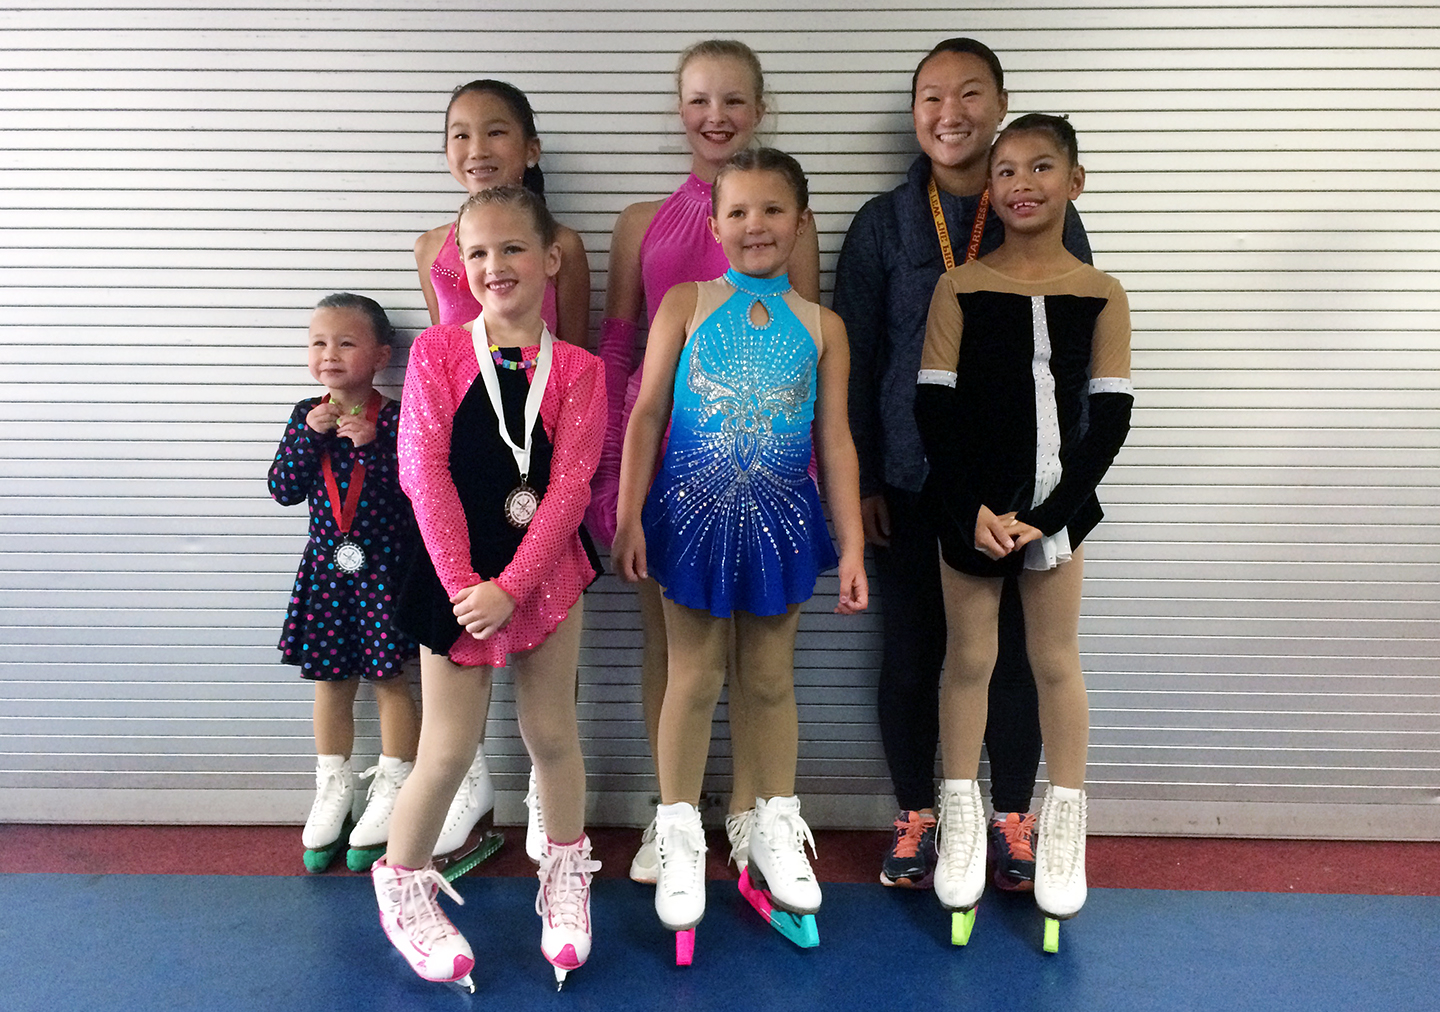 Sycamore Ice Skating Club skaters at the 2015 Tony Todd competition